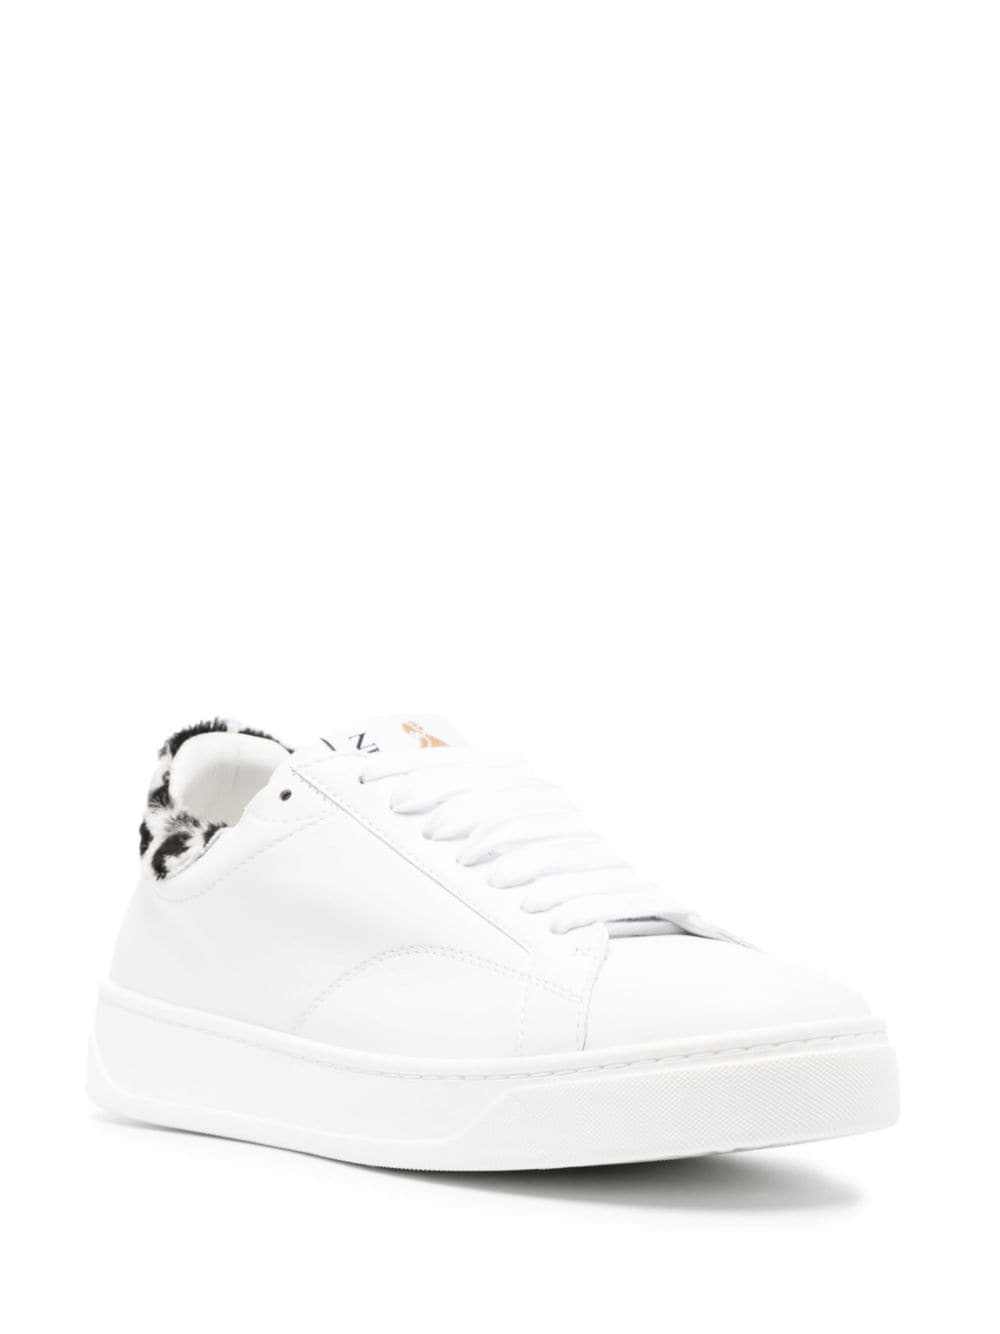 DDB0 leather sneakers - 2